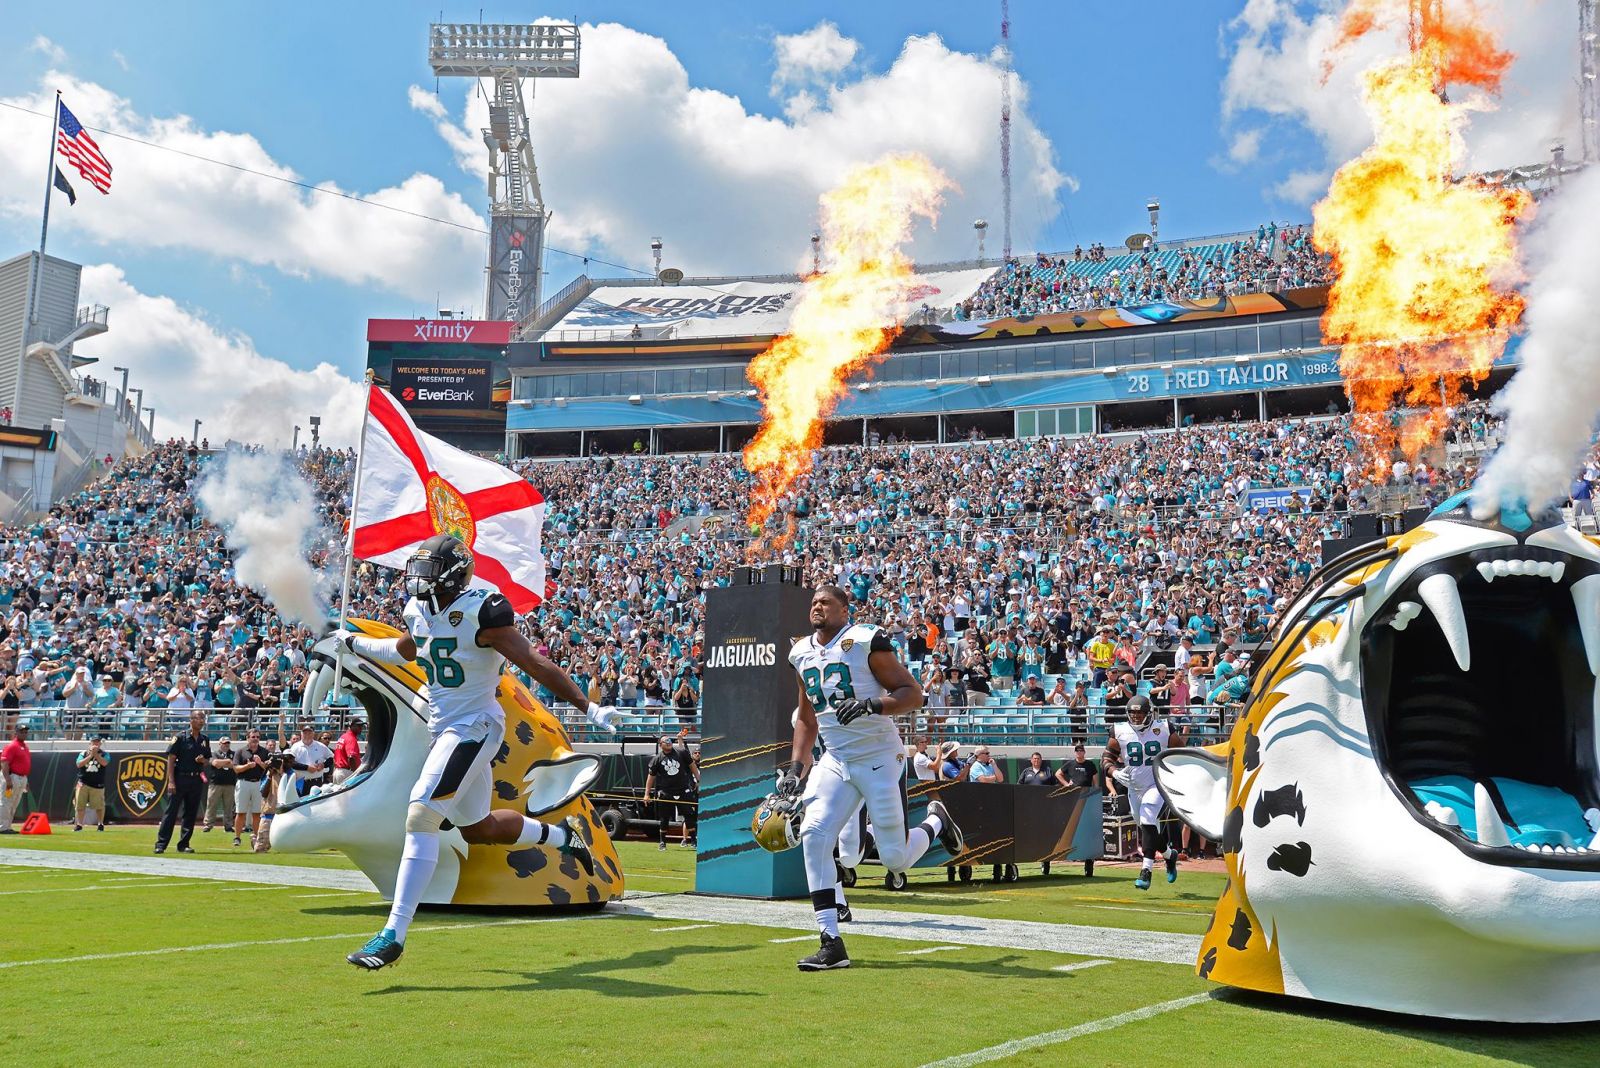 tickets to jaguars playoff game